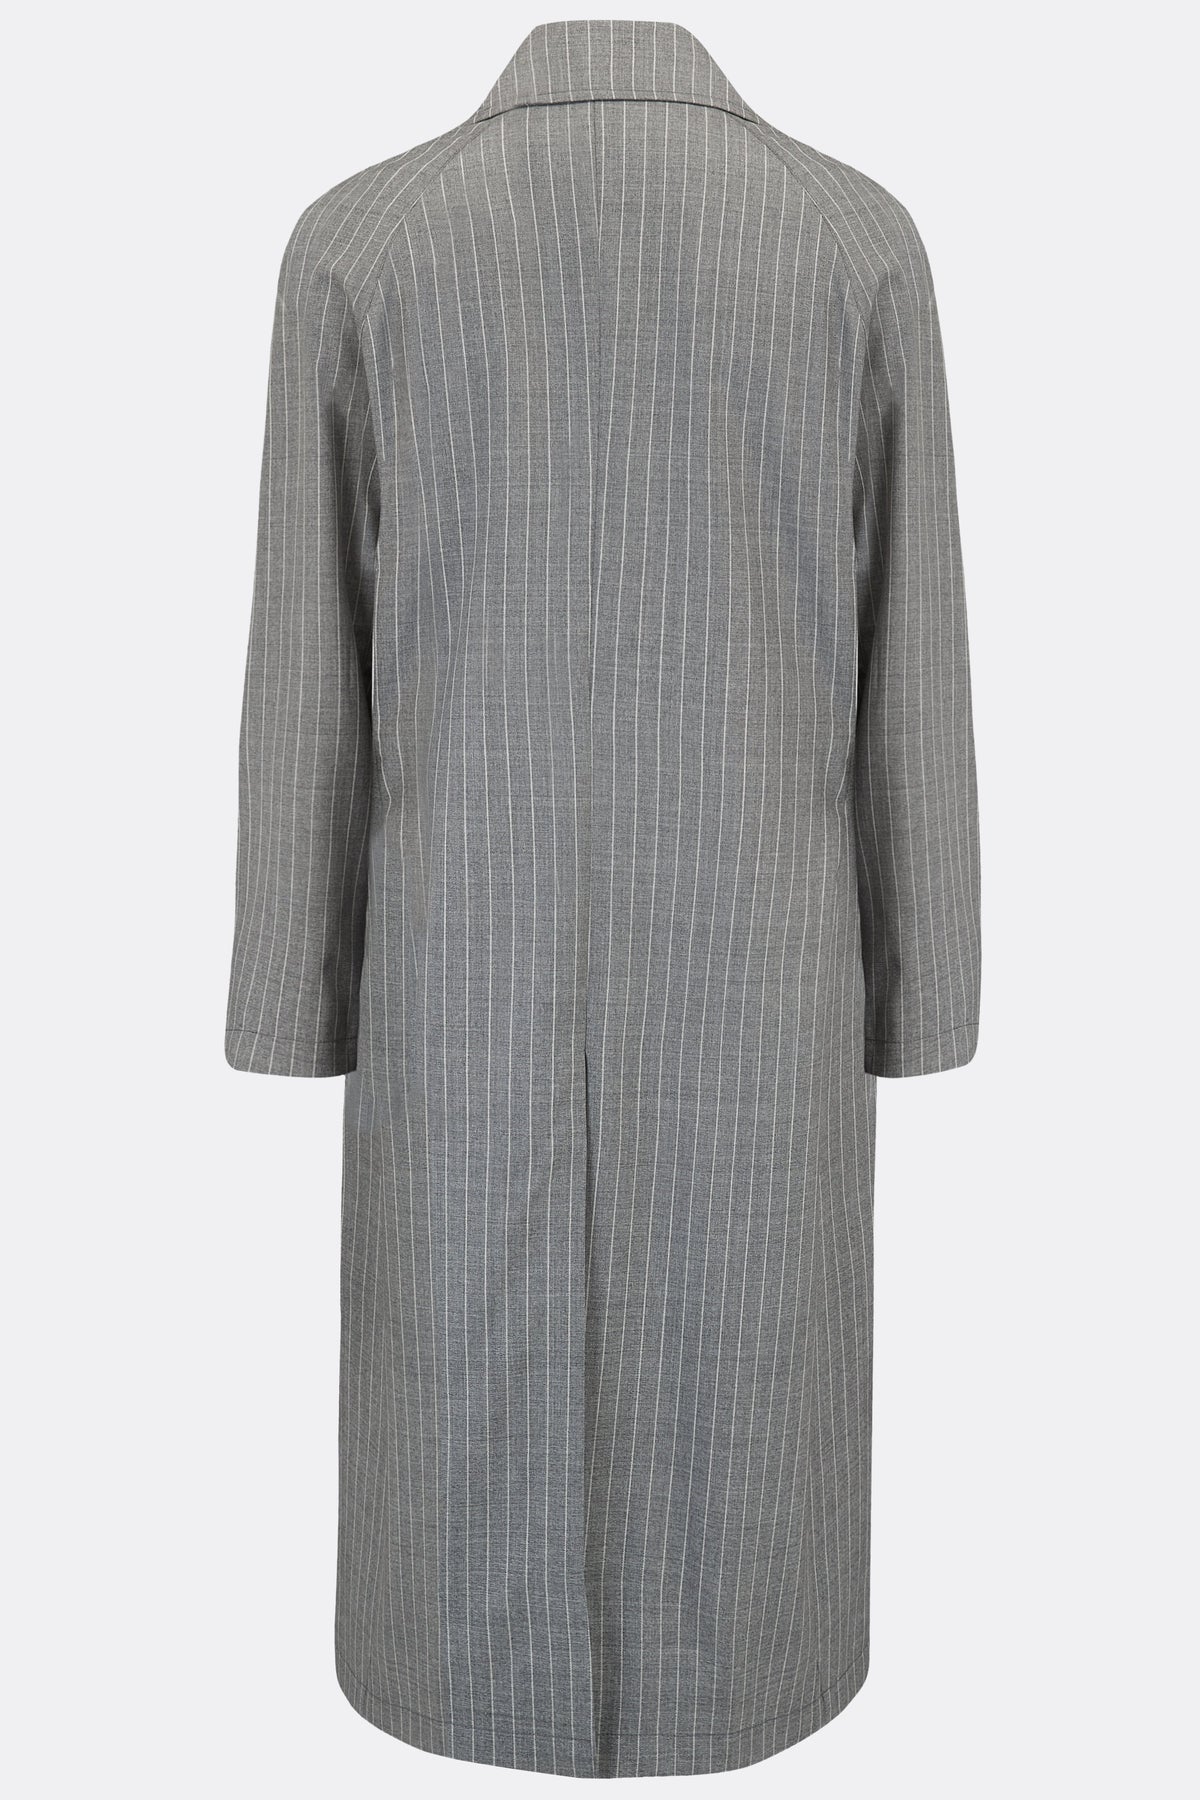 CAGNEY COAT IN GREY STRIPE-menswear-A Child Of The Jago